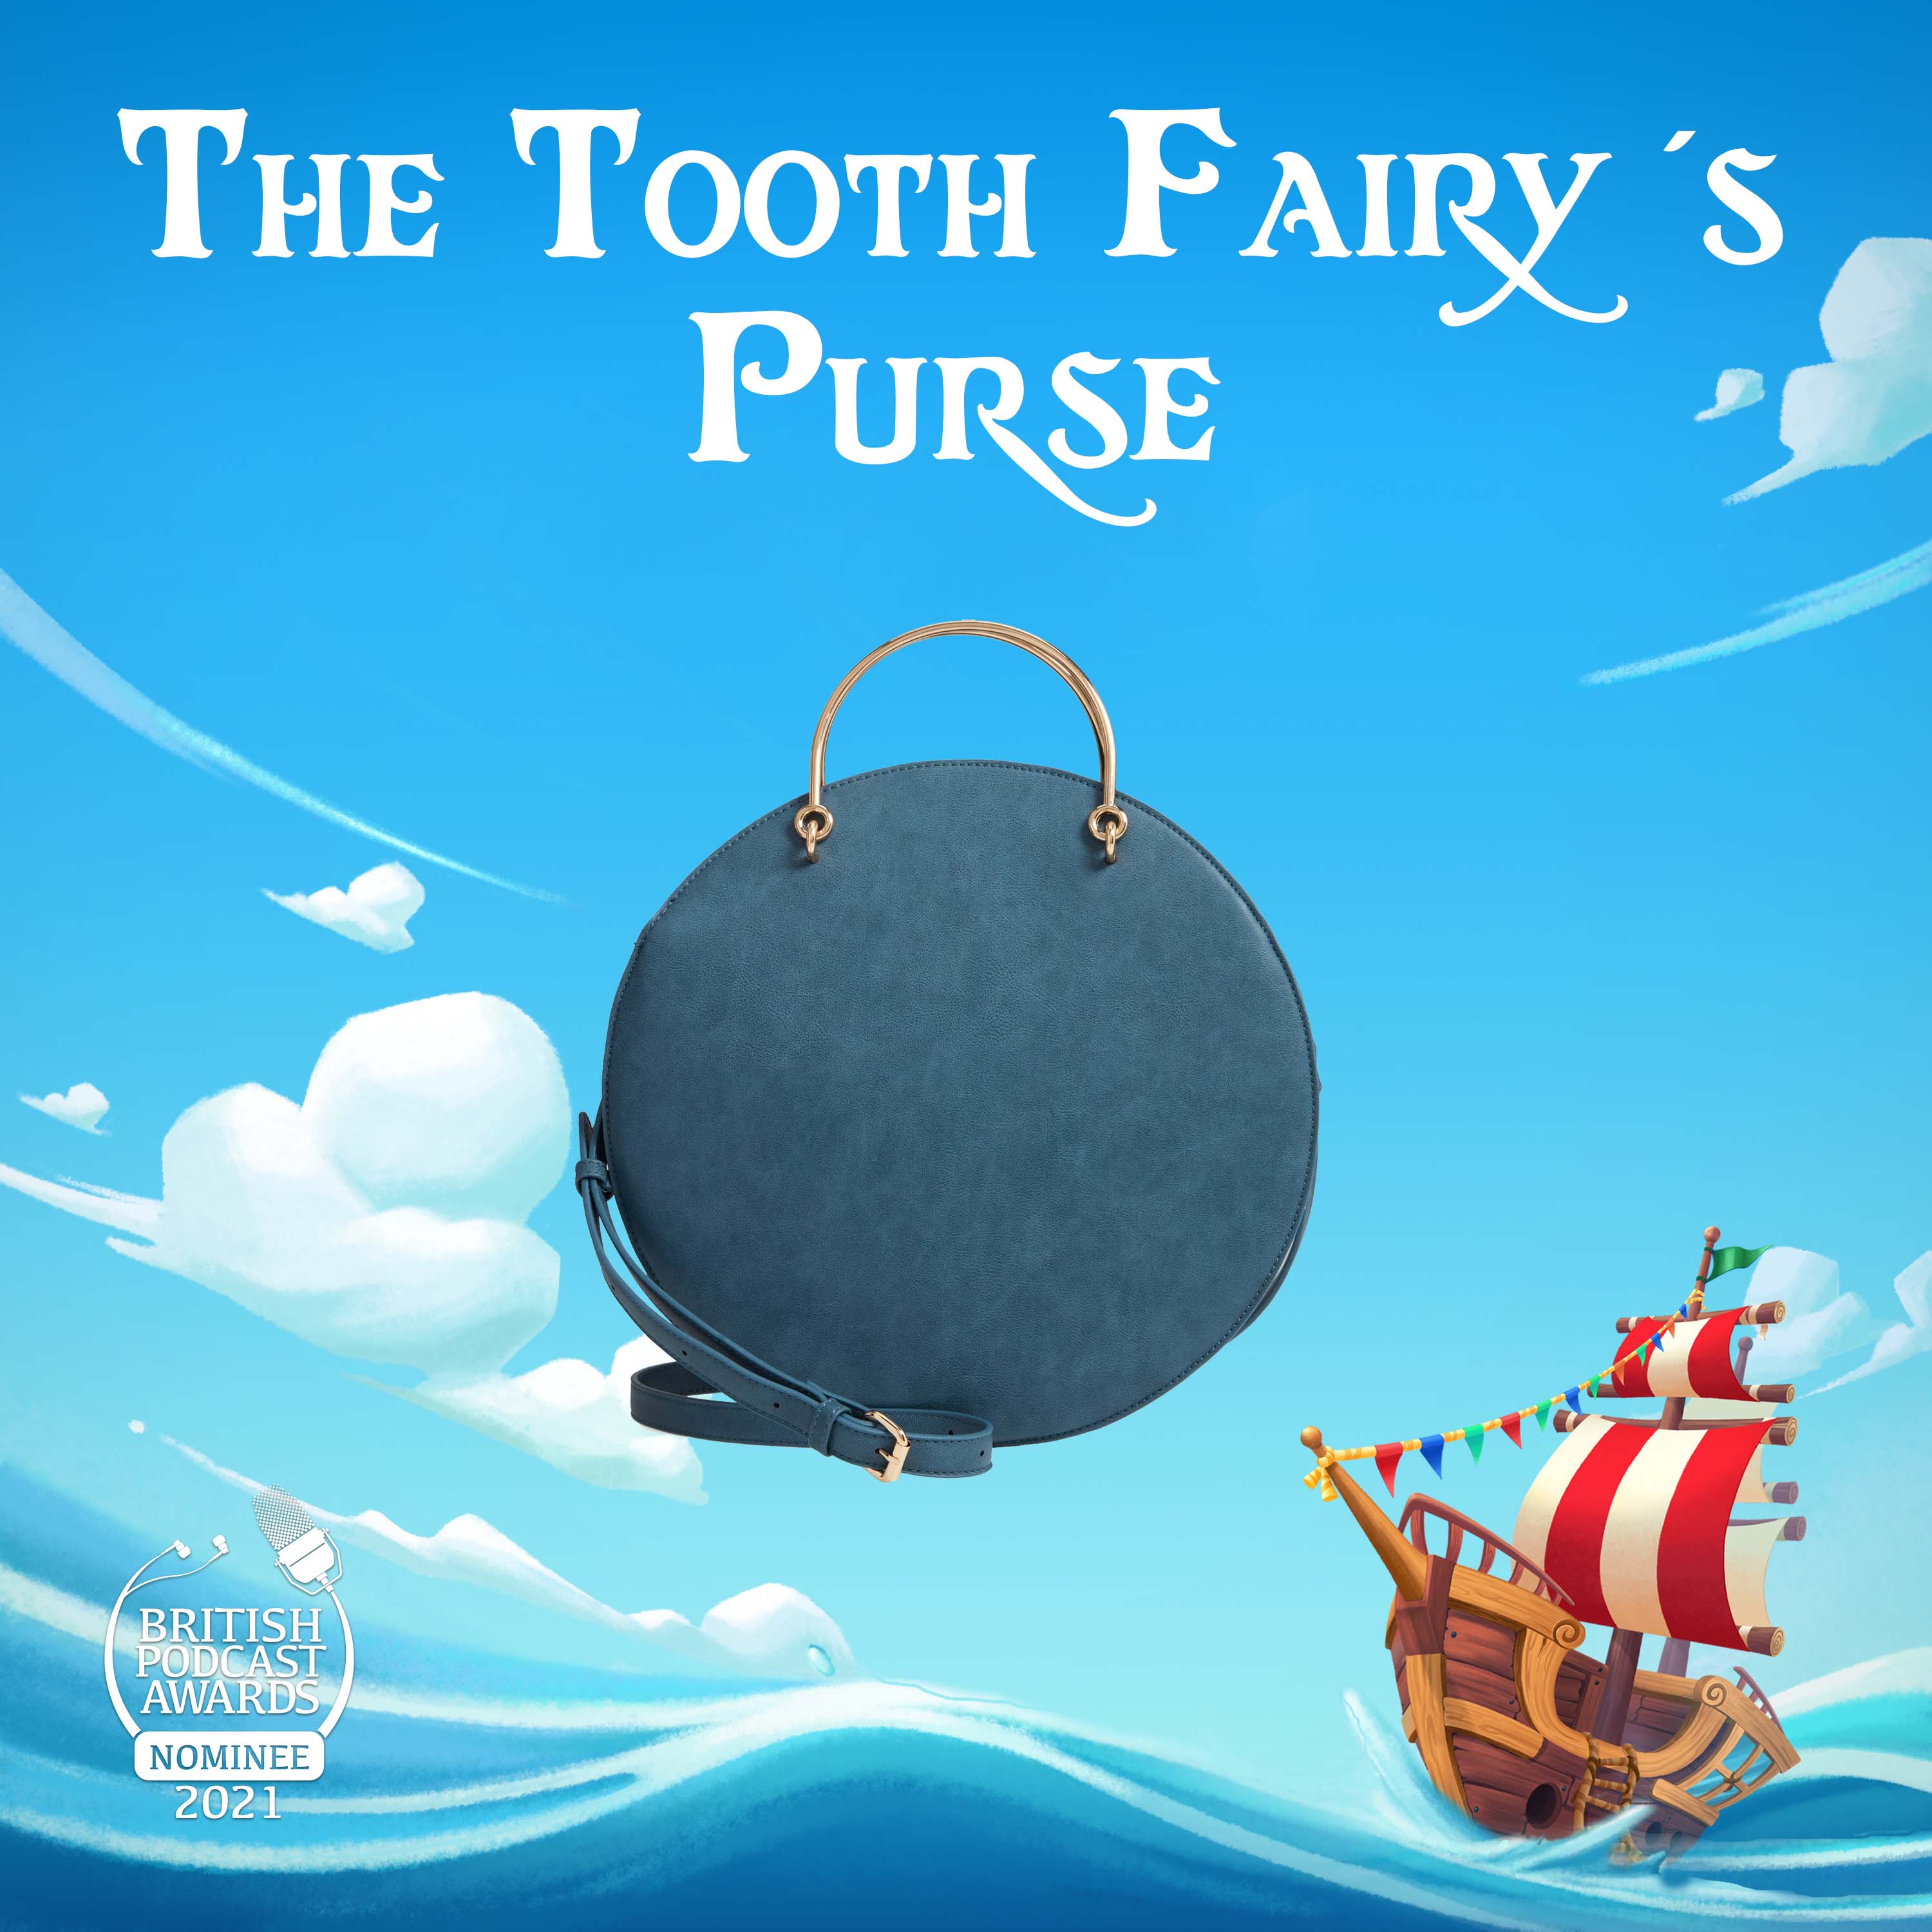 The Tooth Fairy’s Purse